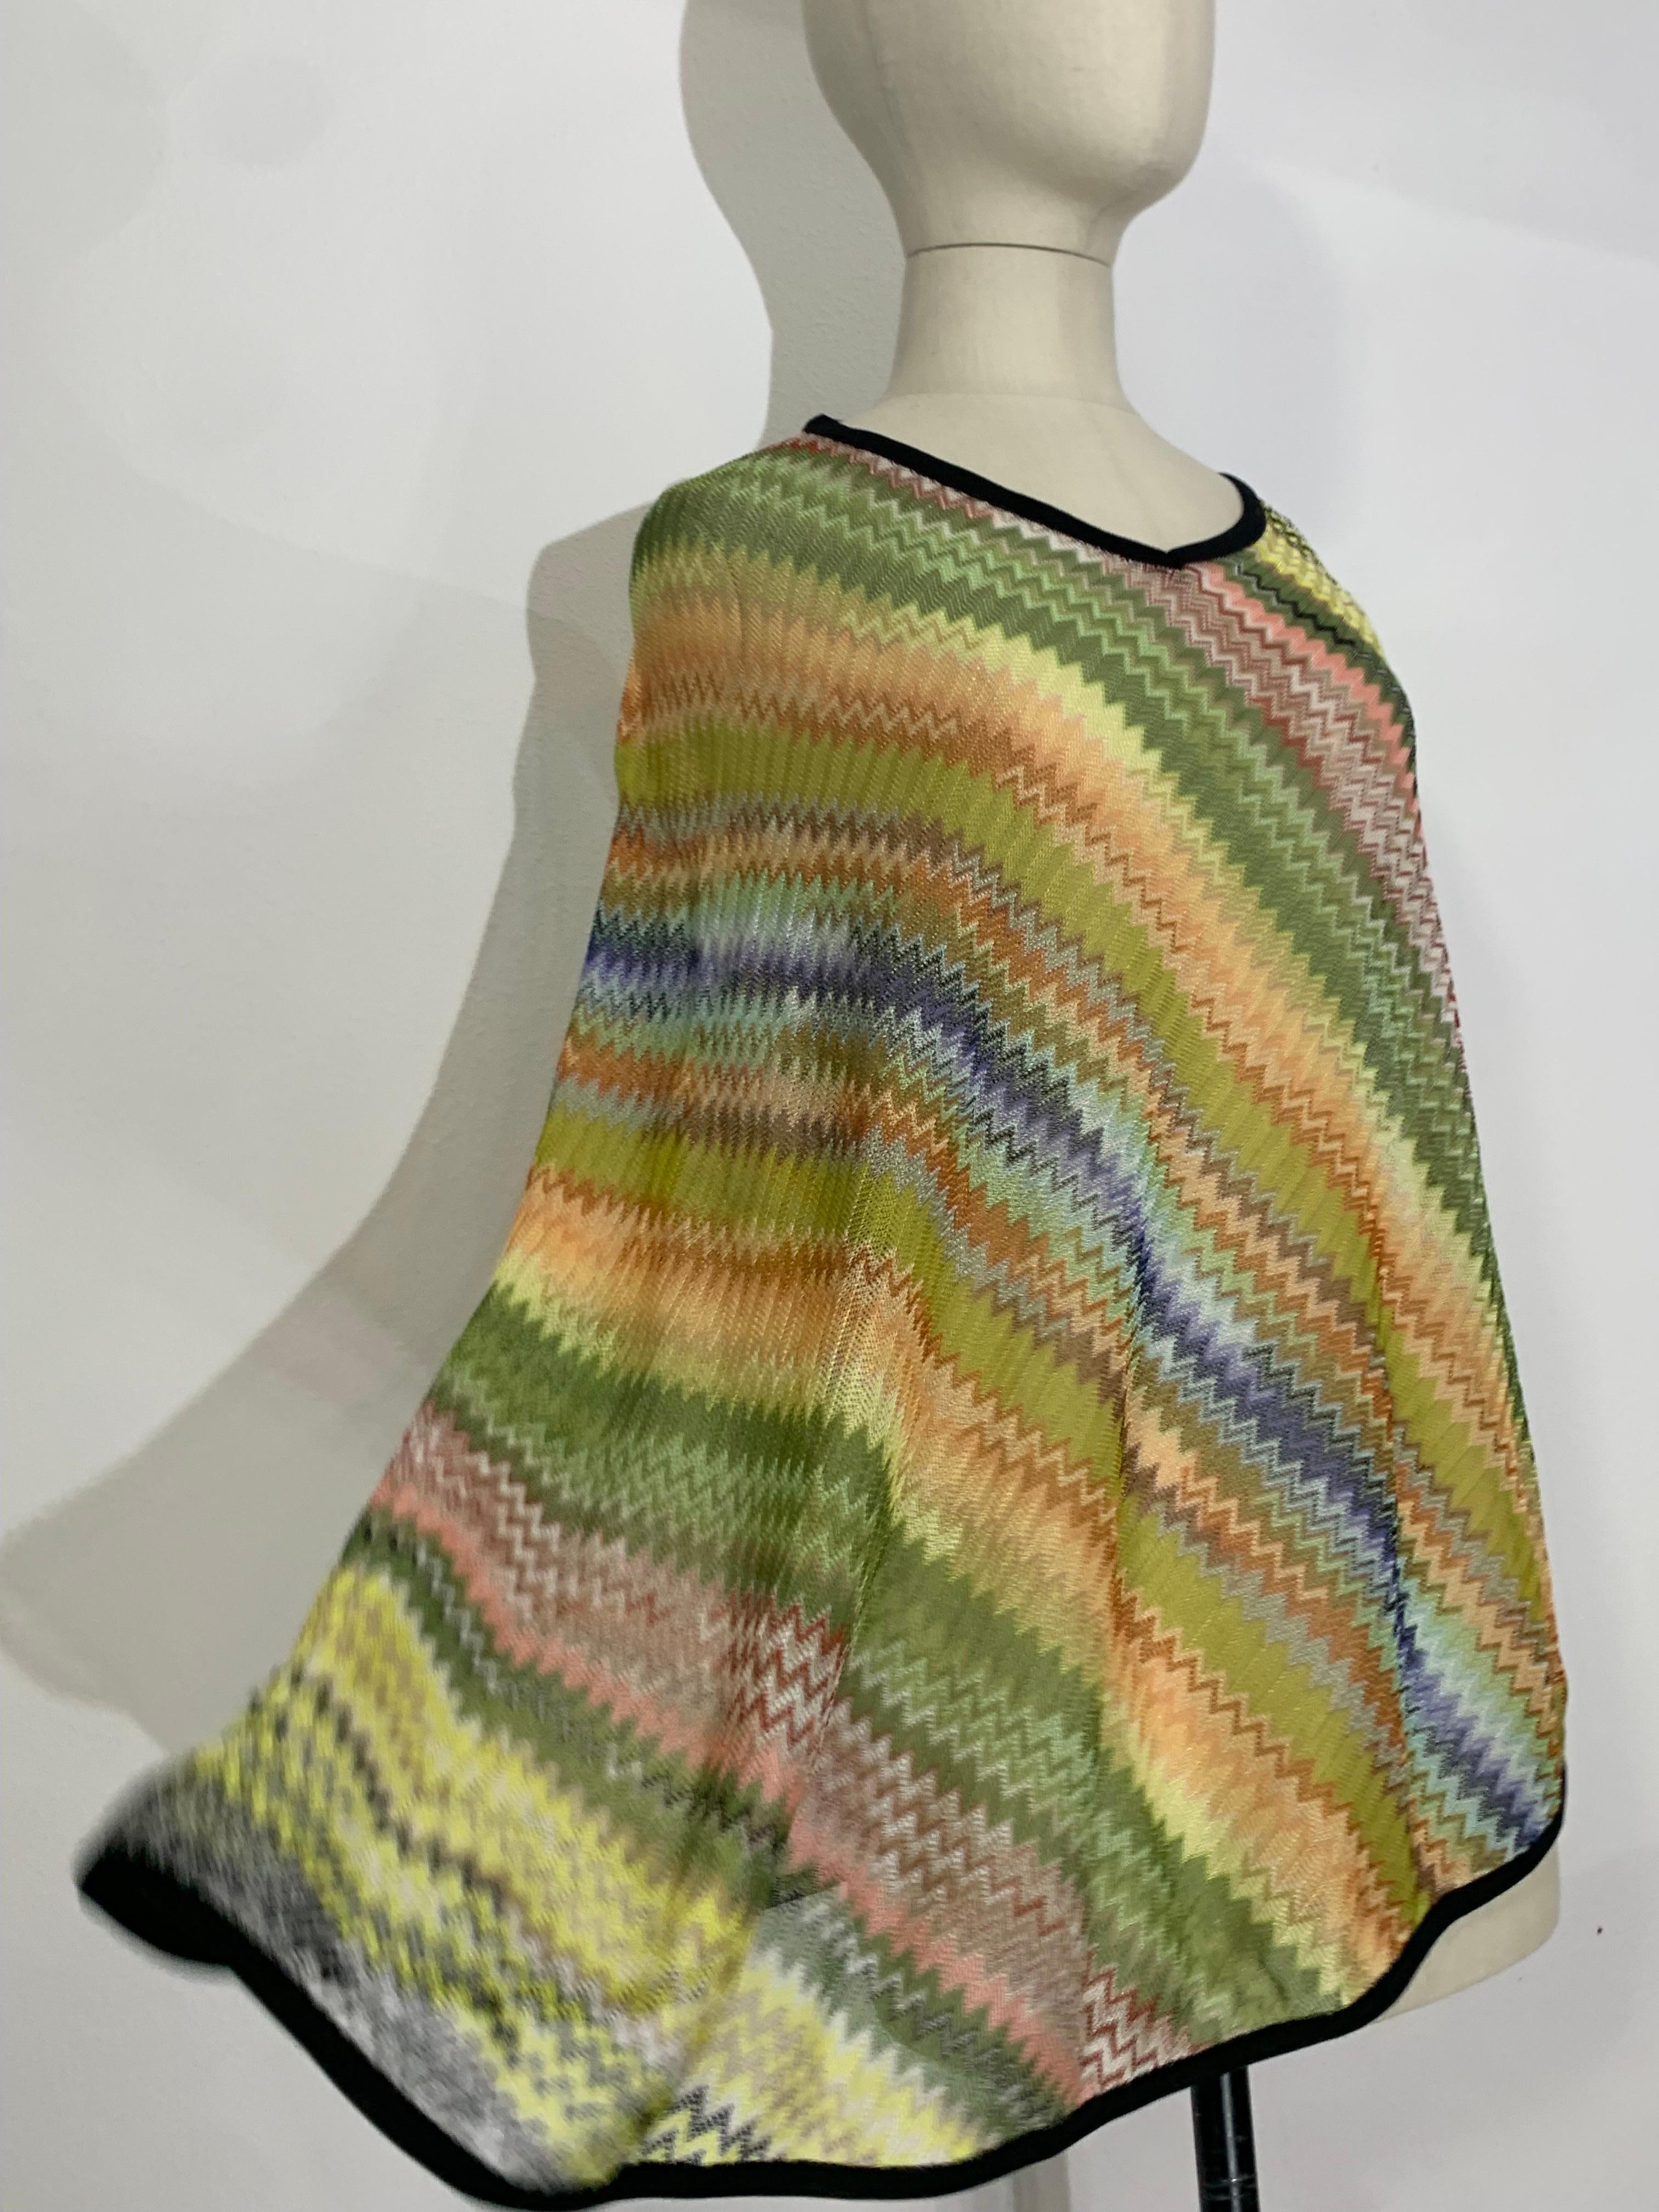 Missoni Spring/Summer Rayon & Cotton Knit Cover-Up in Classic Missoni Zig-Zag For Sale 8